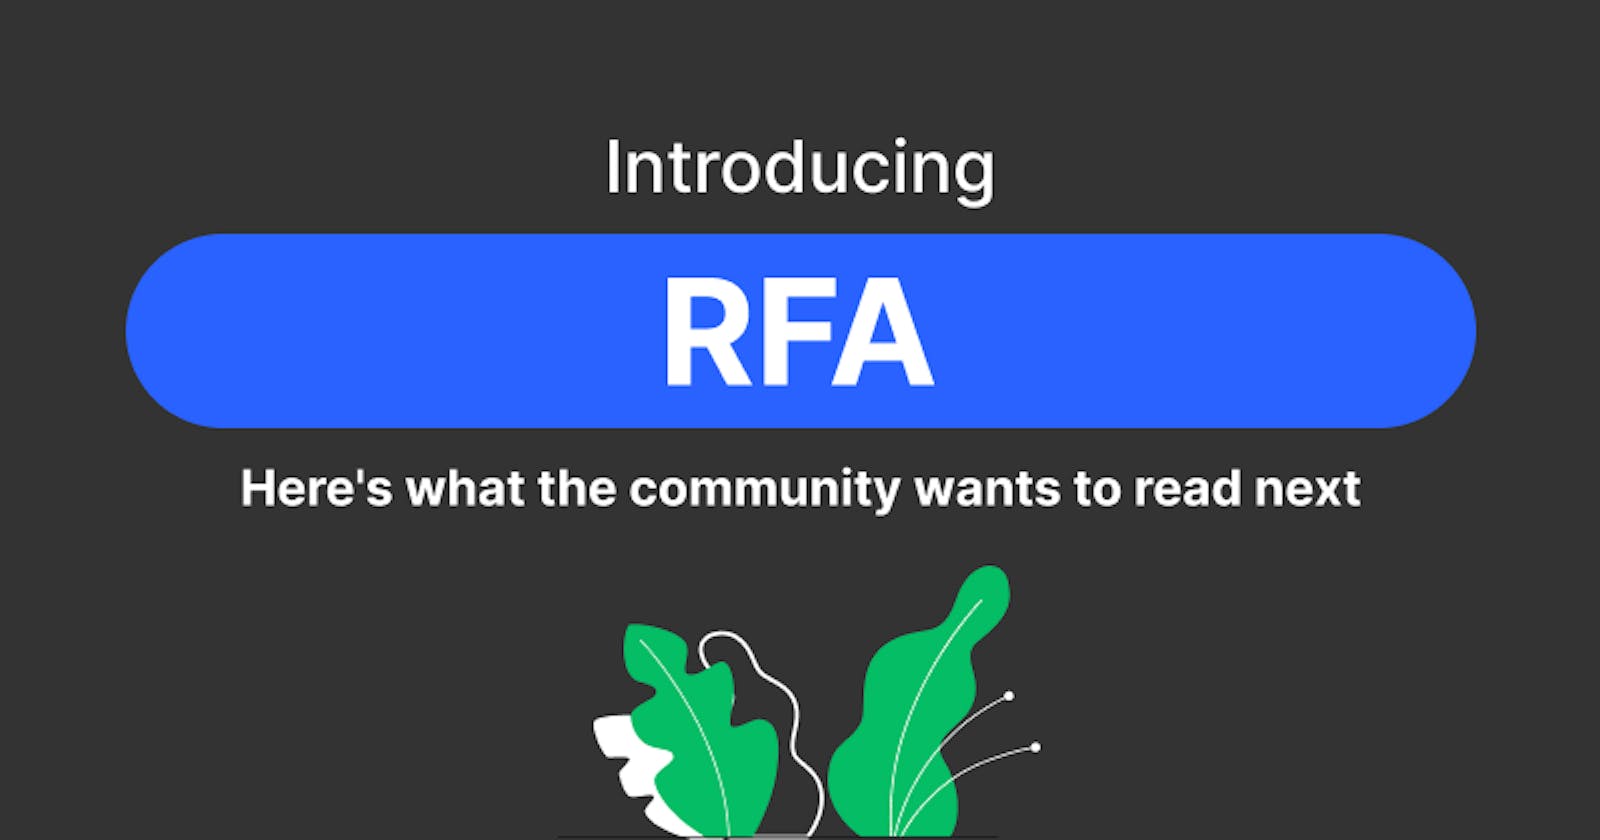 Introducing RFA (Requests For Articles) ⚡️